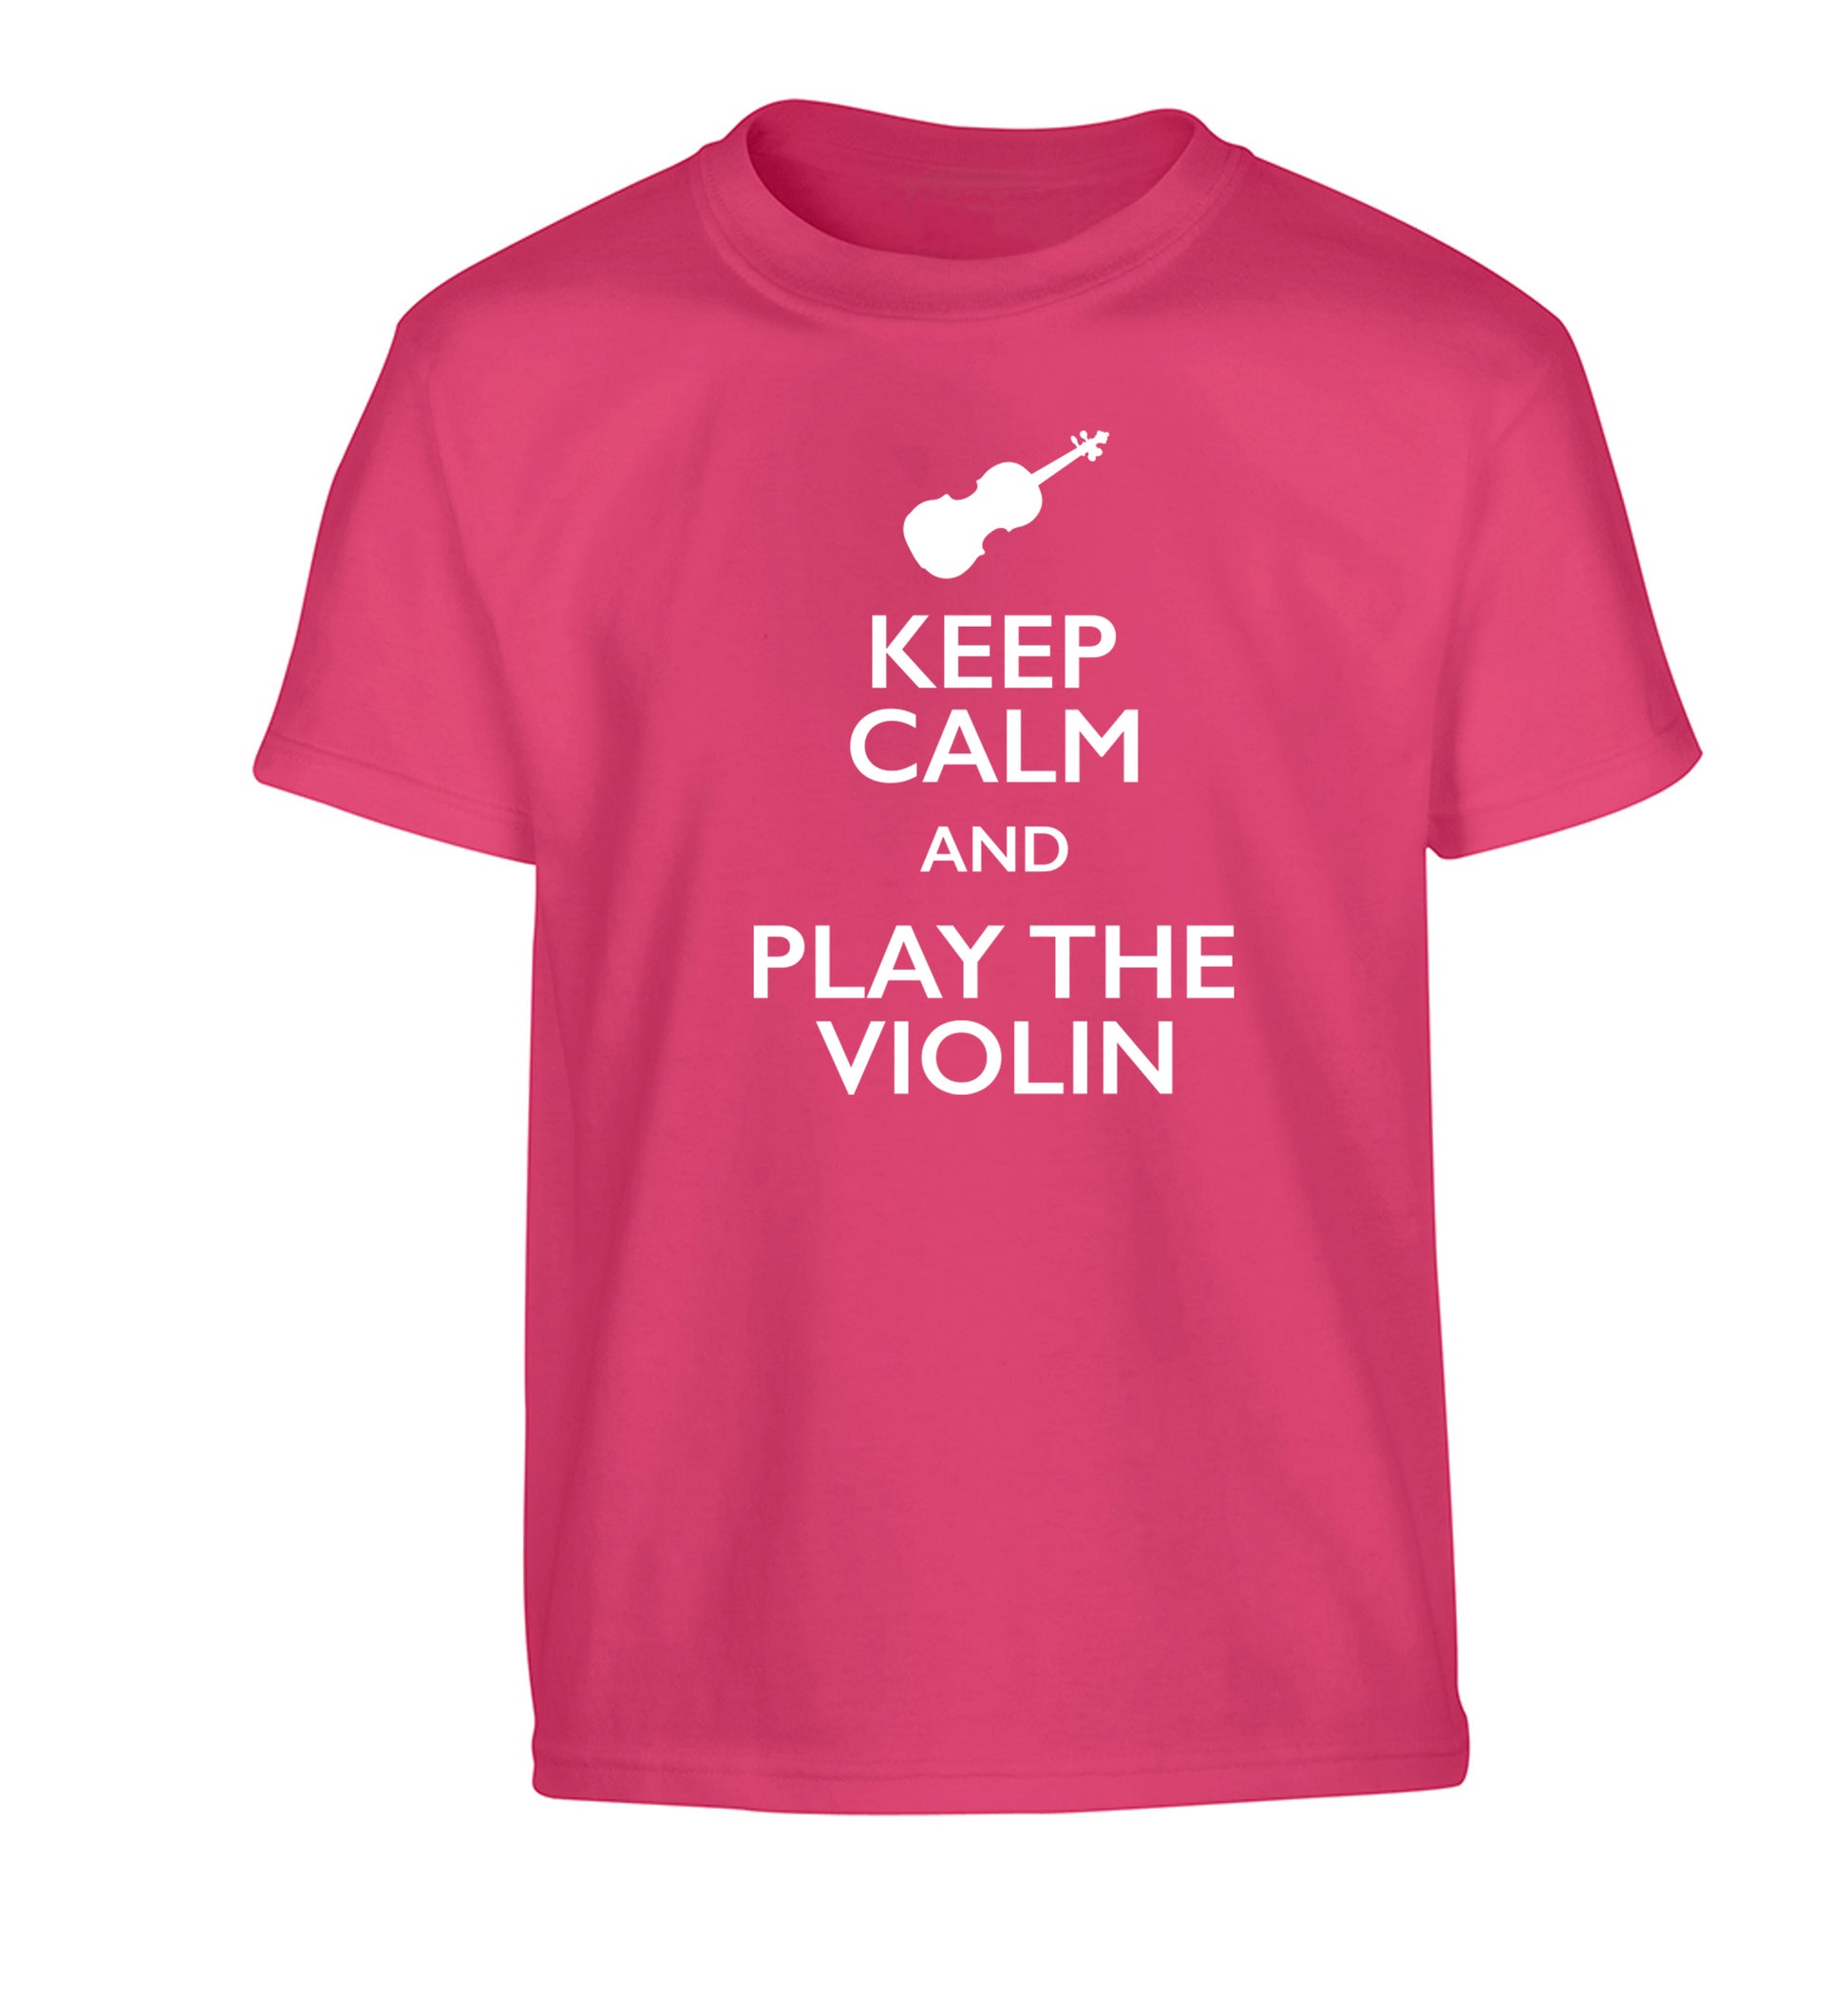 Keep calm and play the violin Children's pink Tshirt 12-13 Years